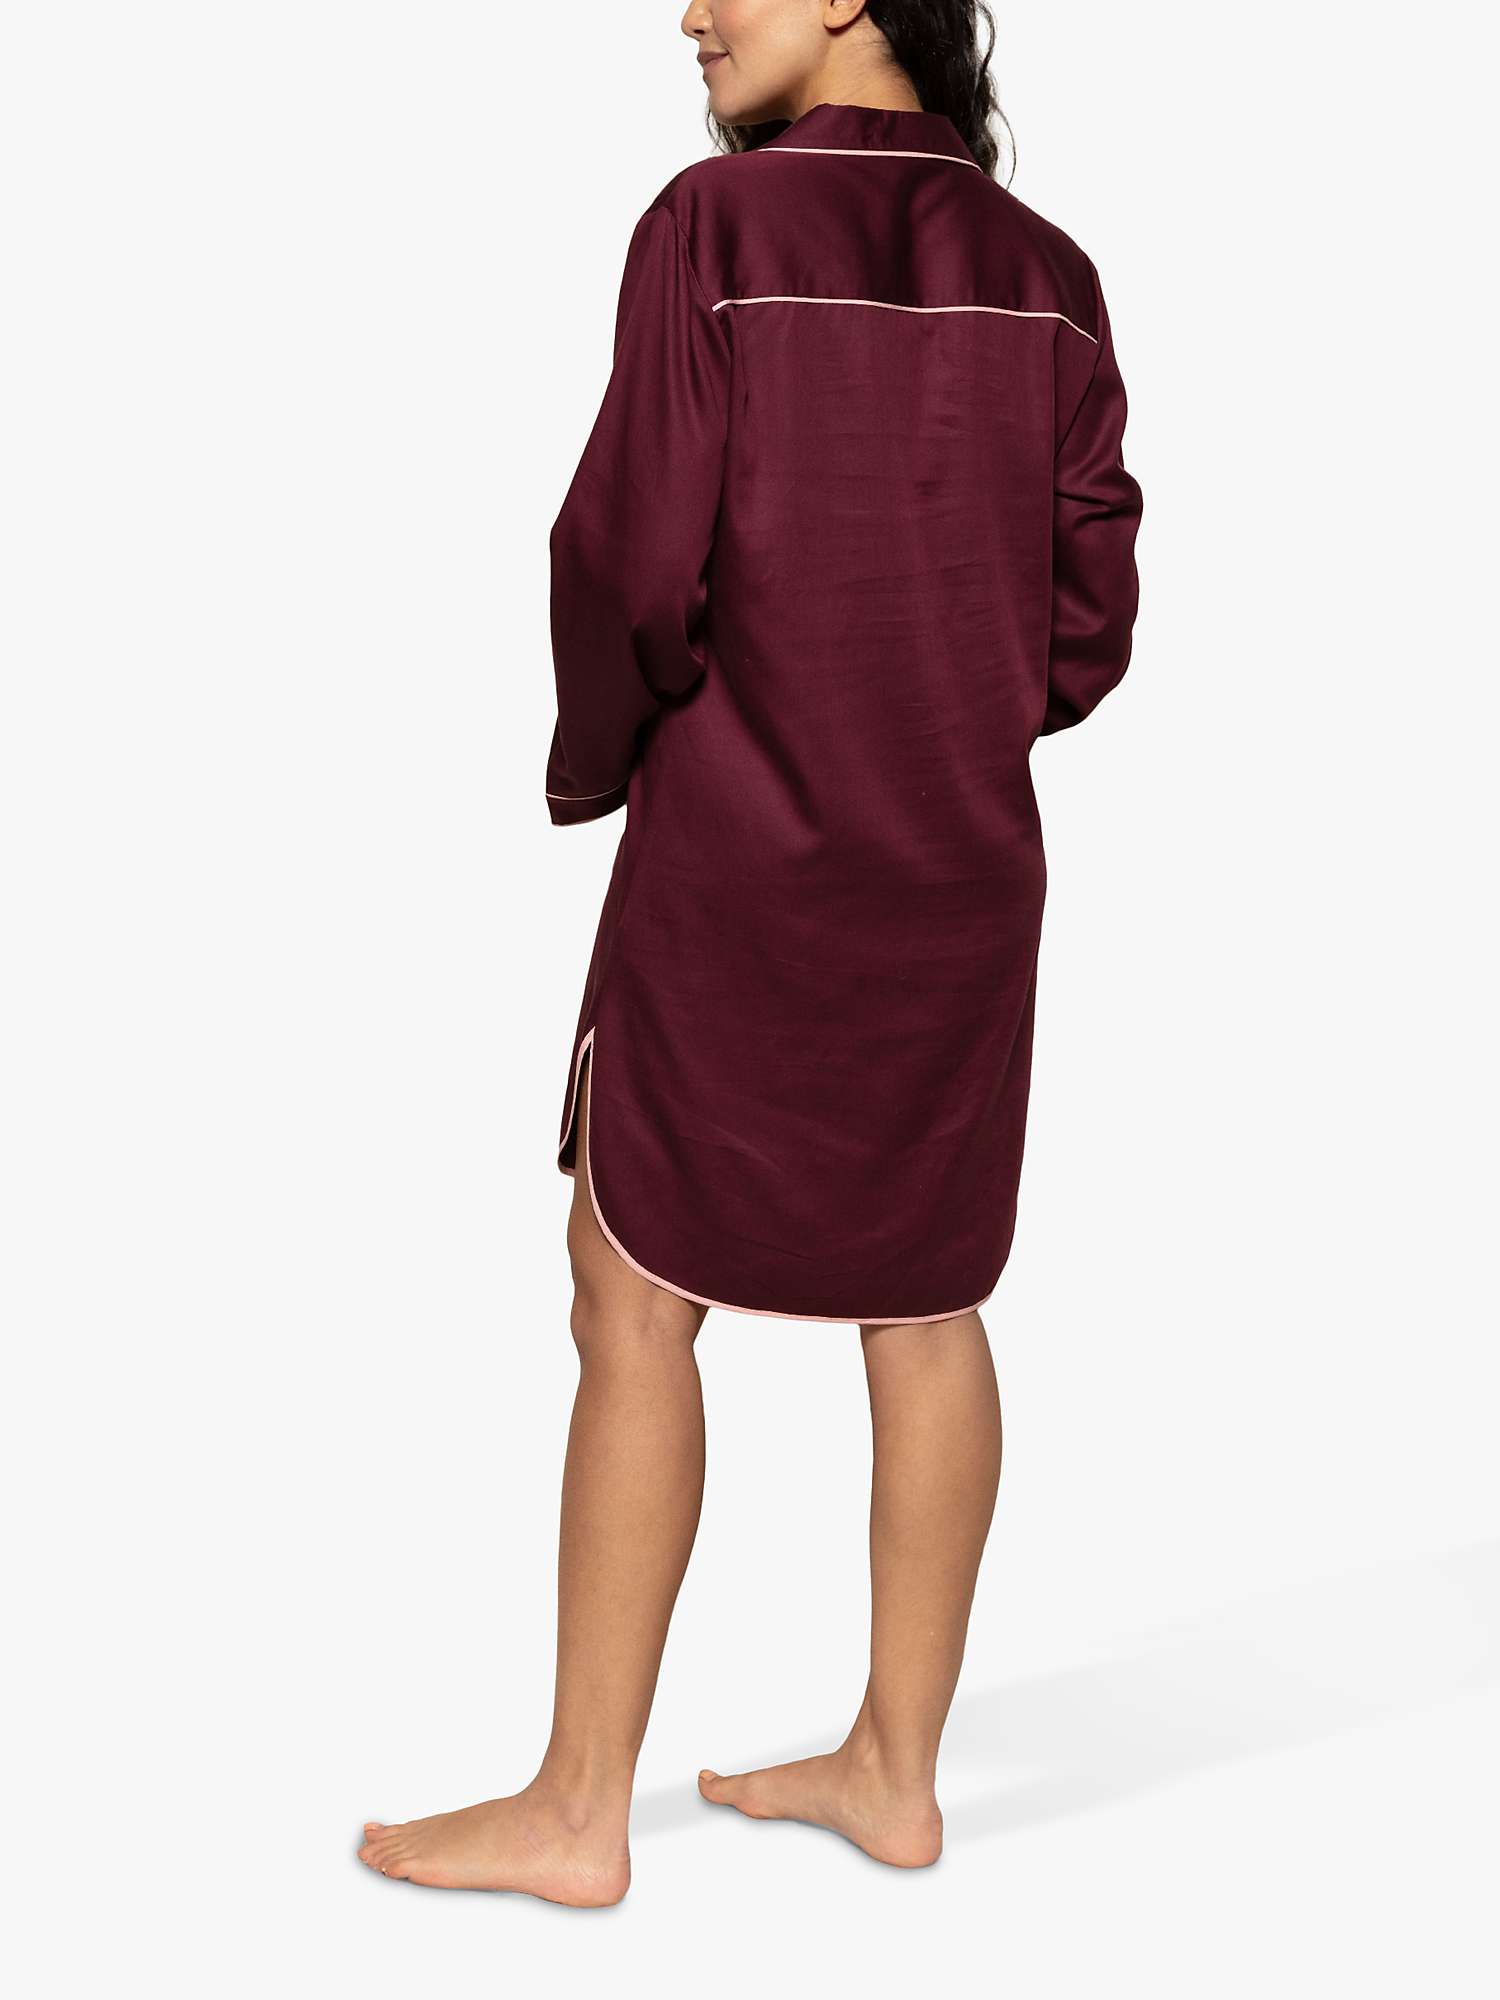 Buy Fable & Eve Piccadilly Nightshirt, Burgundy Online at johnlewis.com